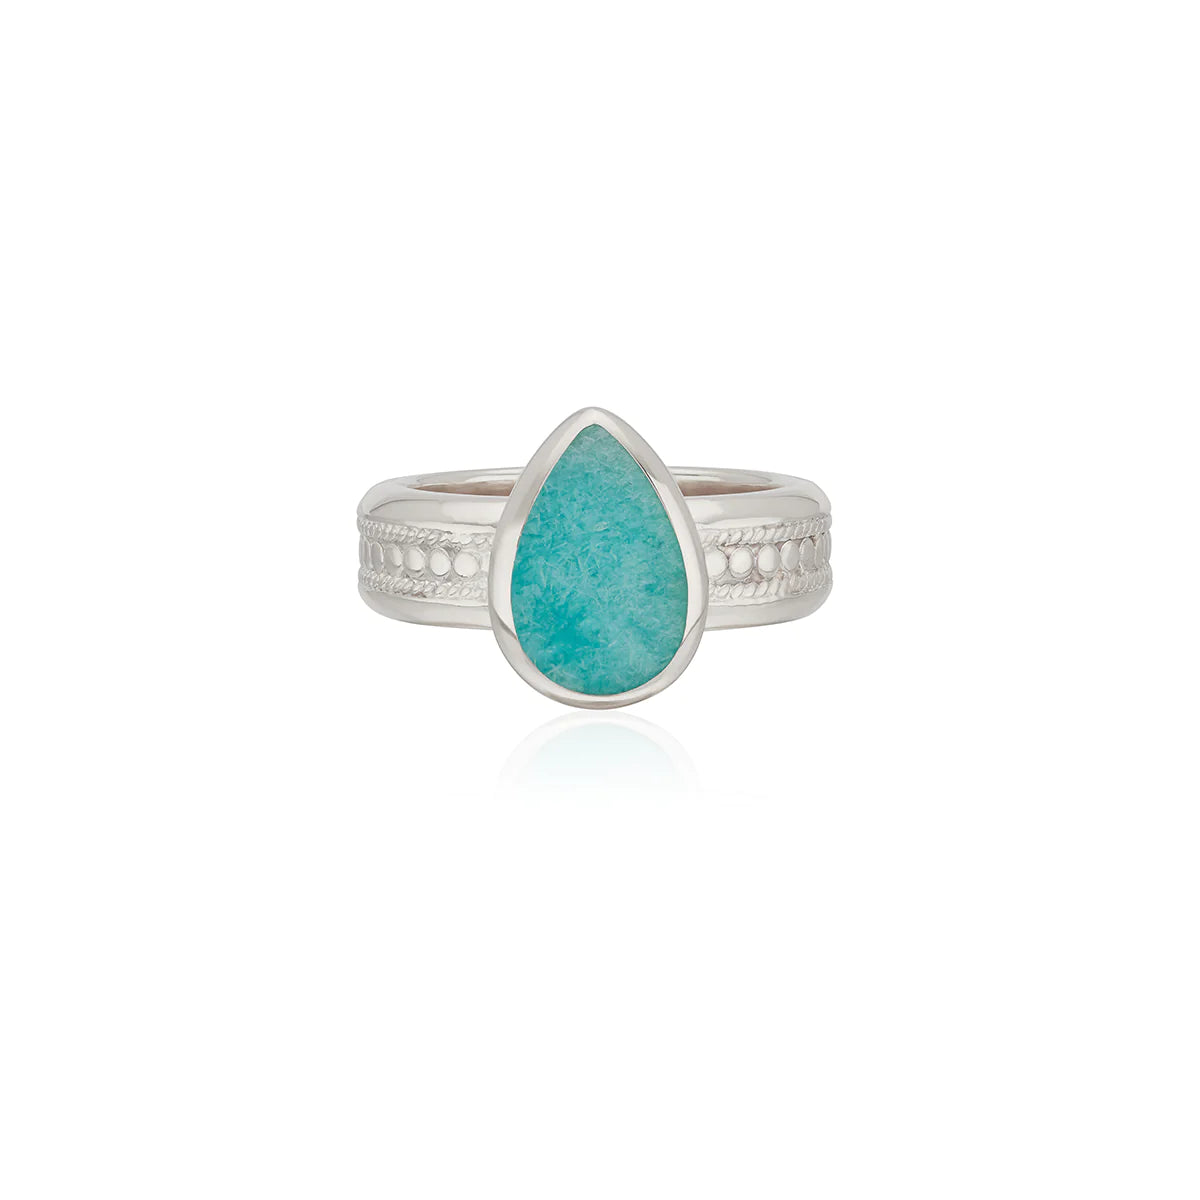 Silver and amazonite cocktail ring on silver band with dotted details